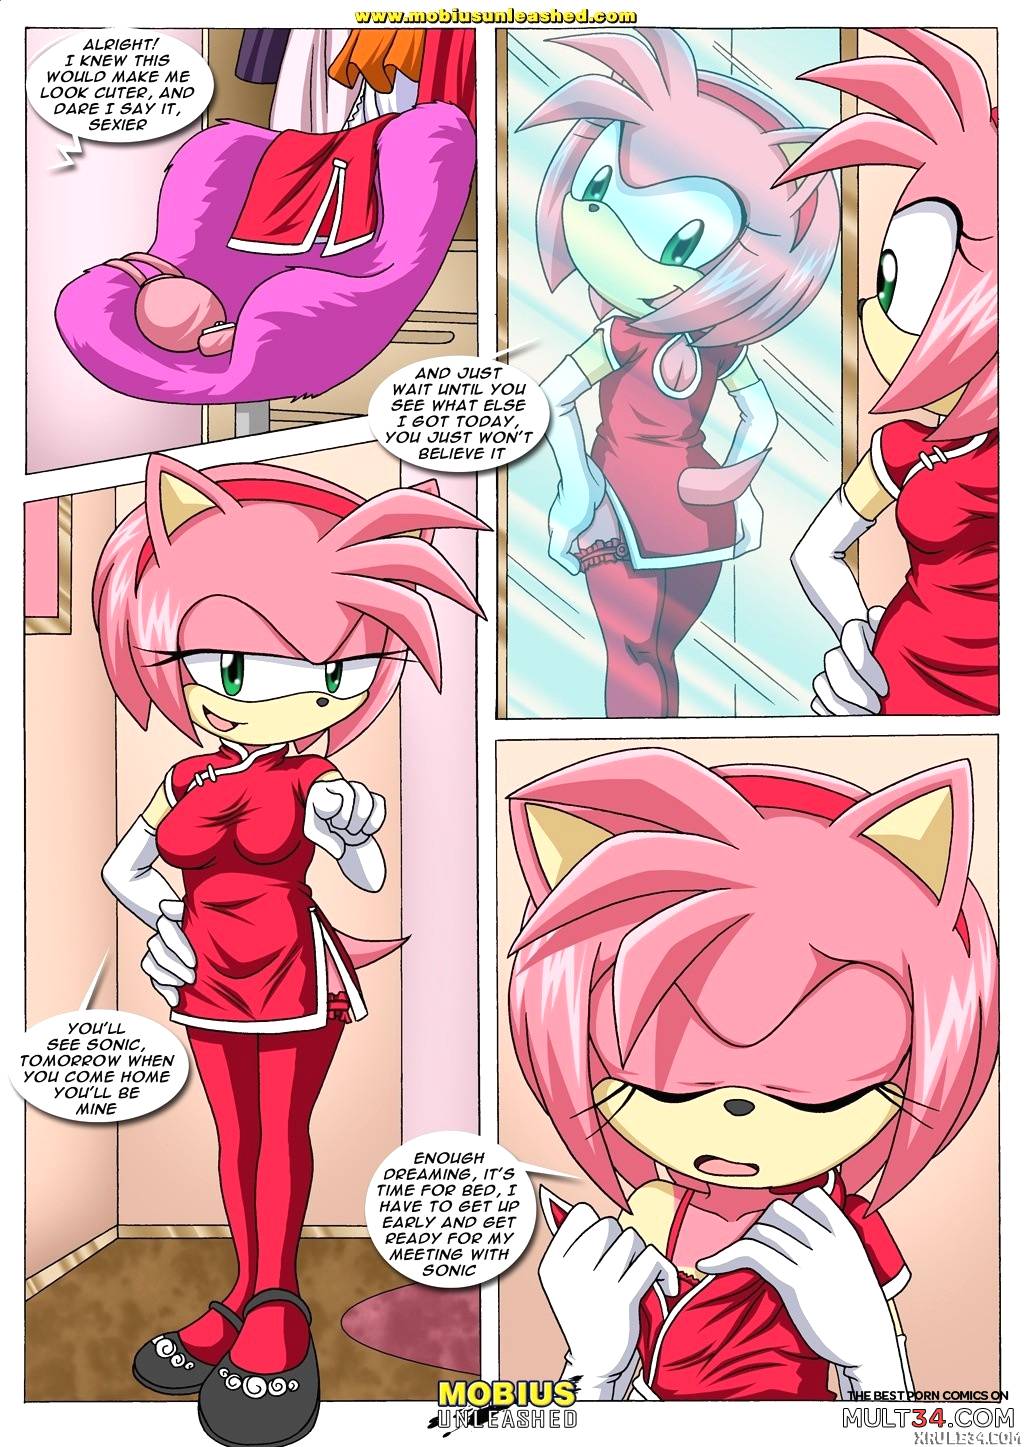 Amy's Fantasy page 2